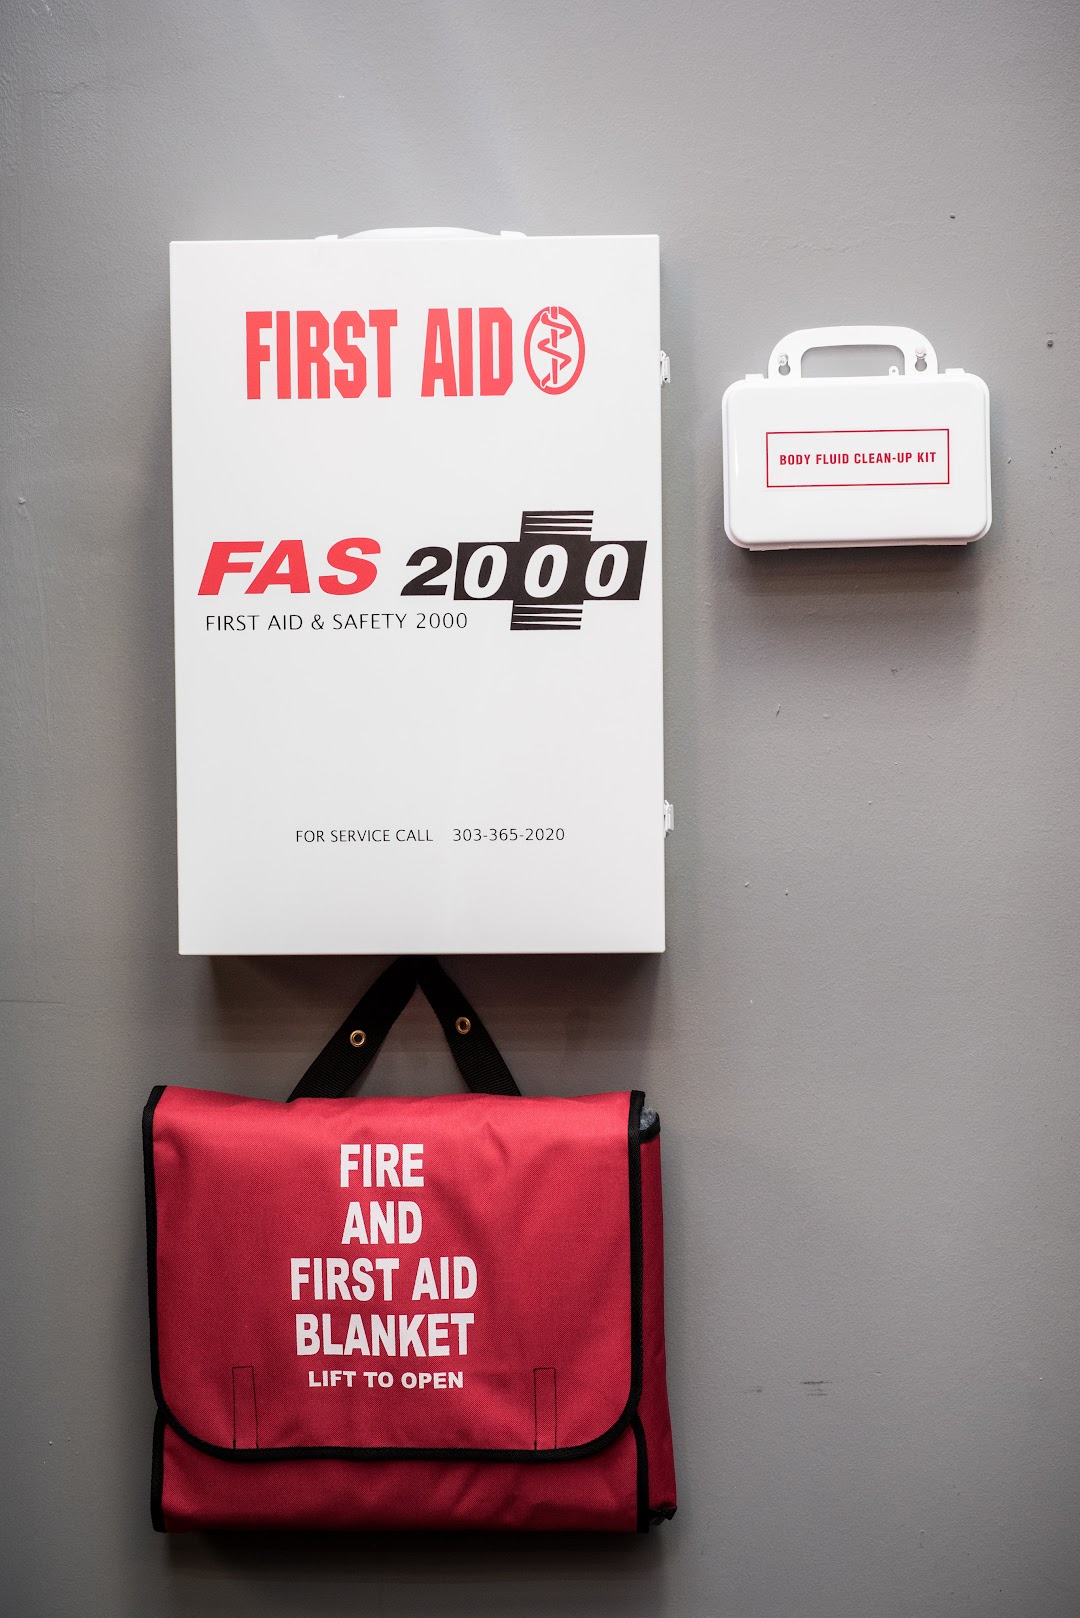 First Aid & Safety 2000